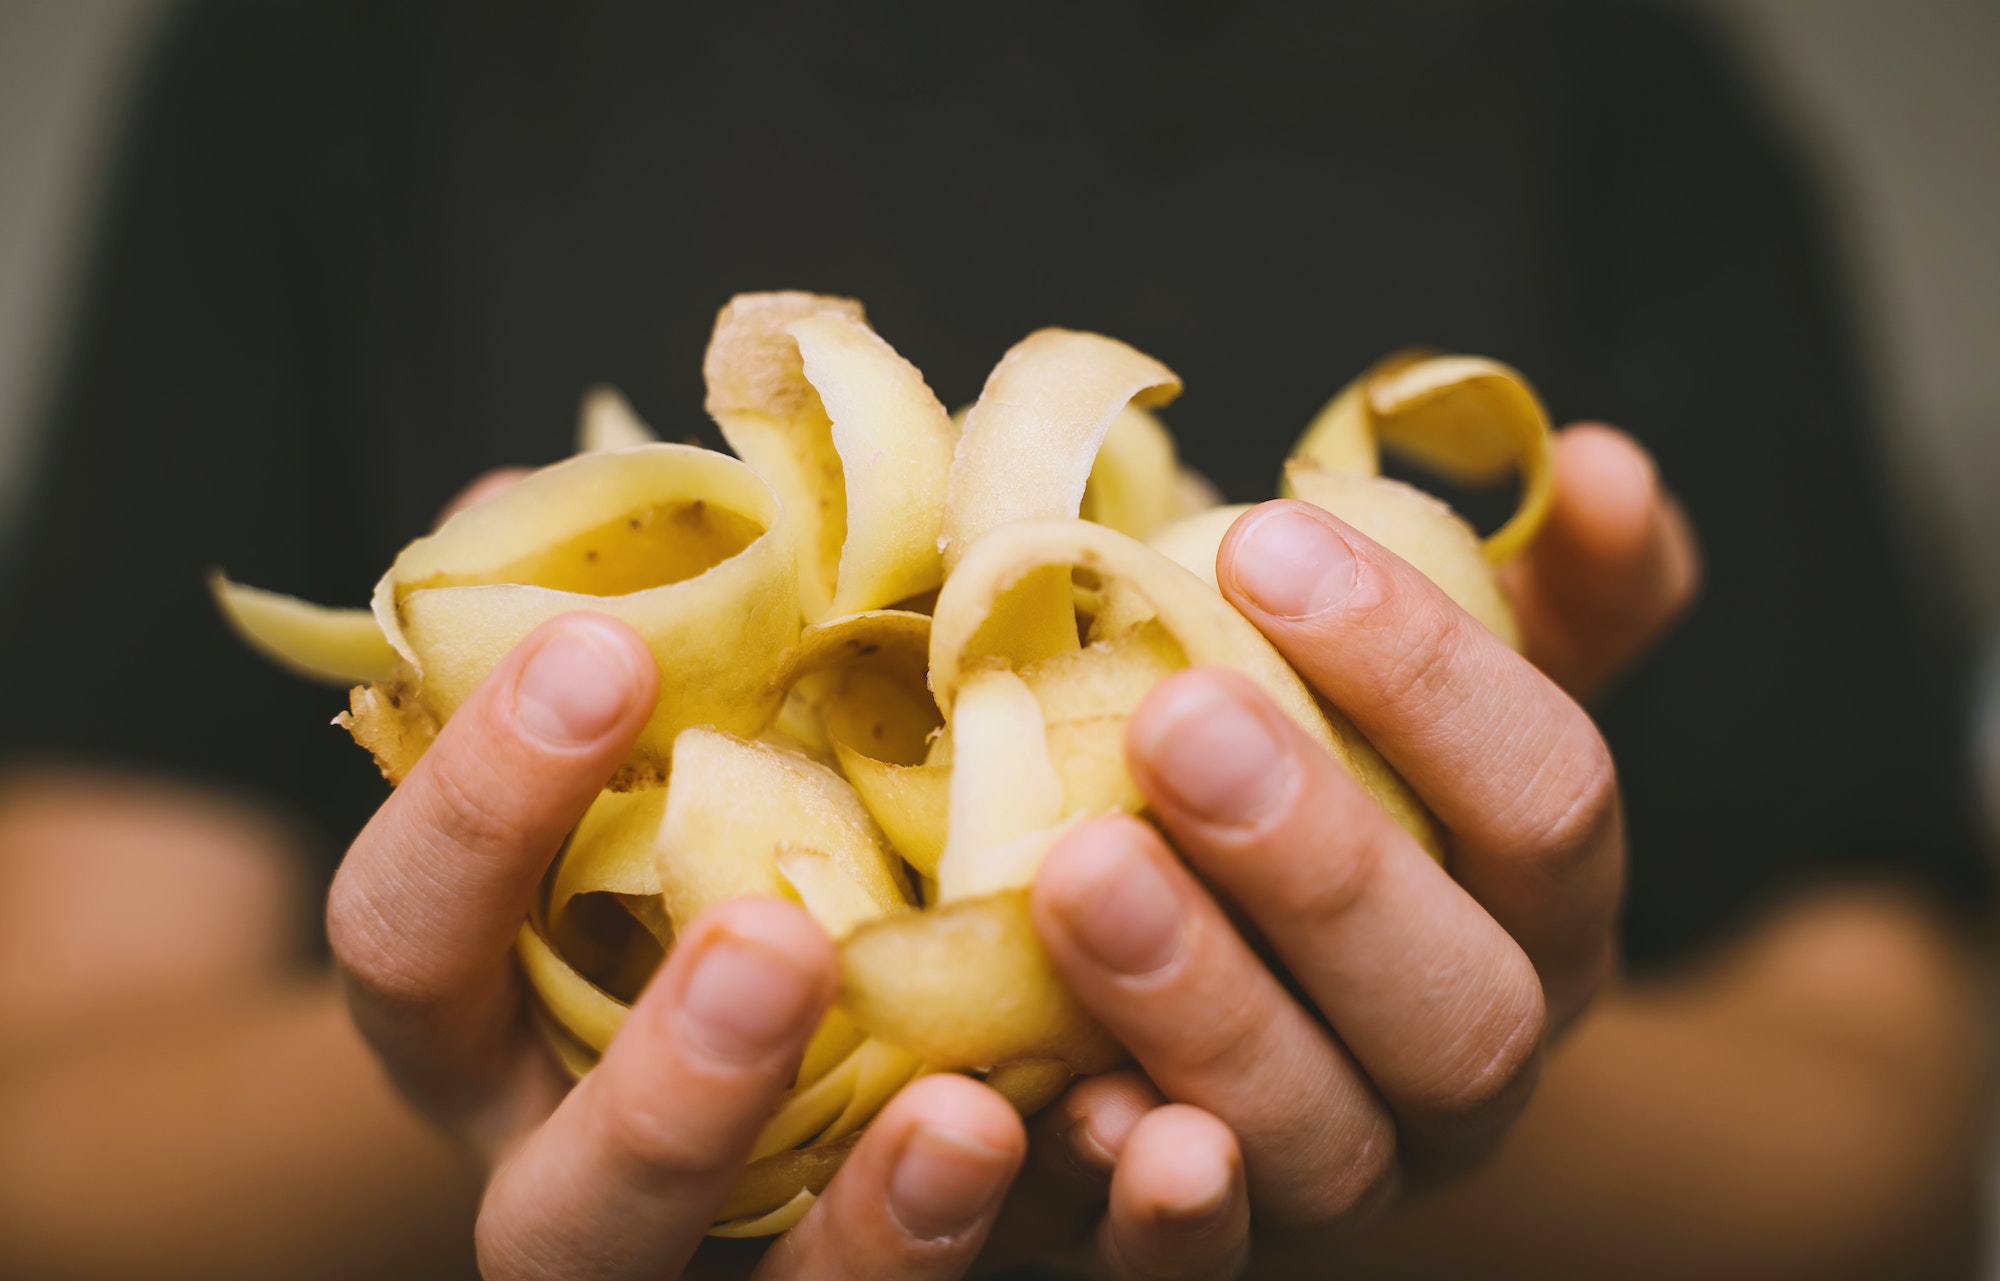 Potato vegetable peels in children hands. Compost concept, recycling of food waste.